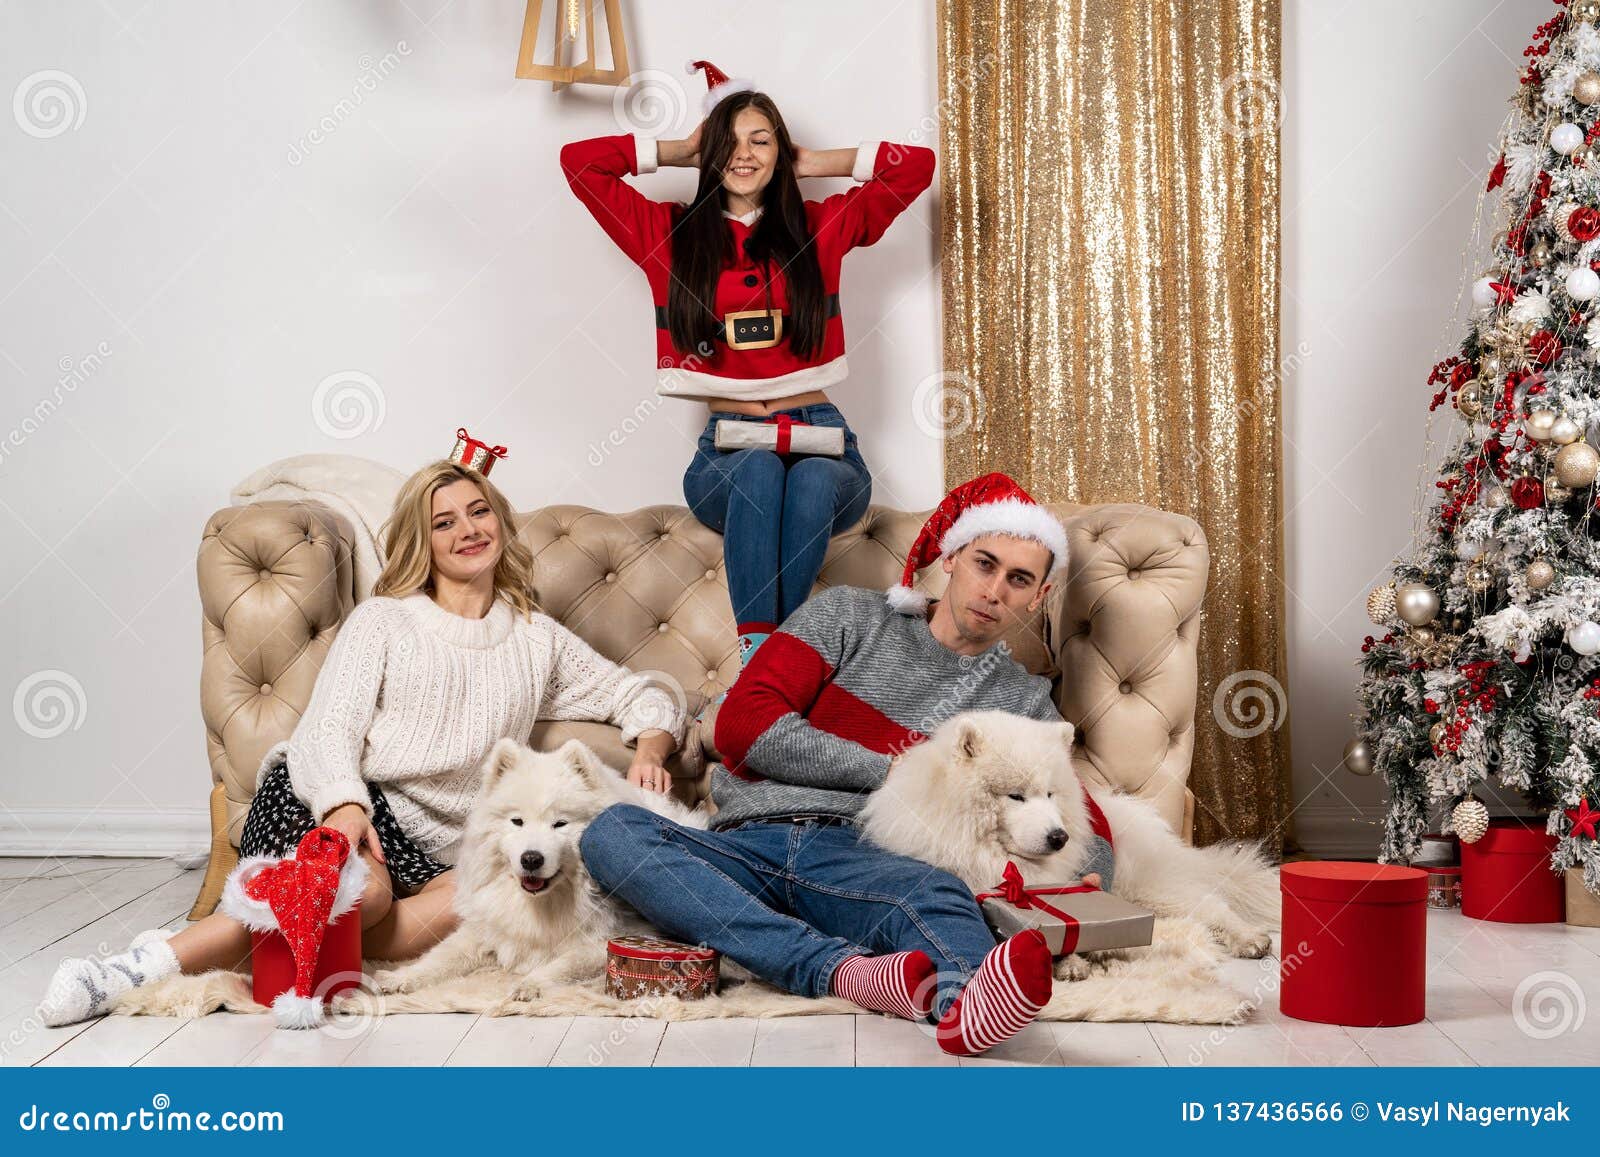 Happy Christmas Celebrating of Young People with Dogs and Gifts Stock ...